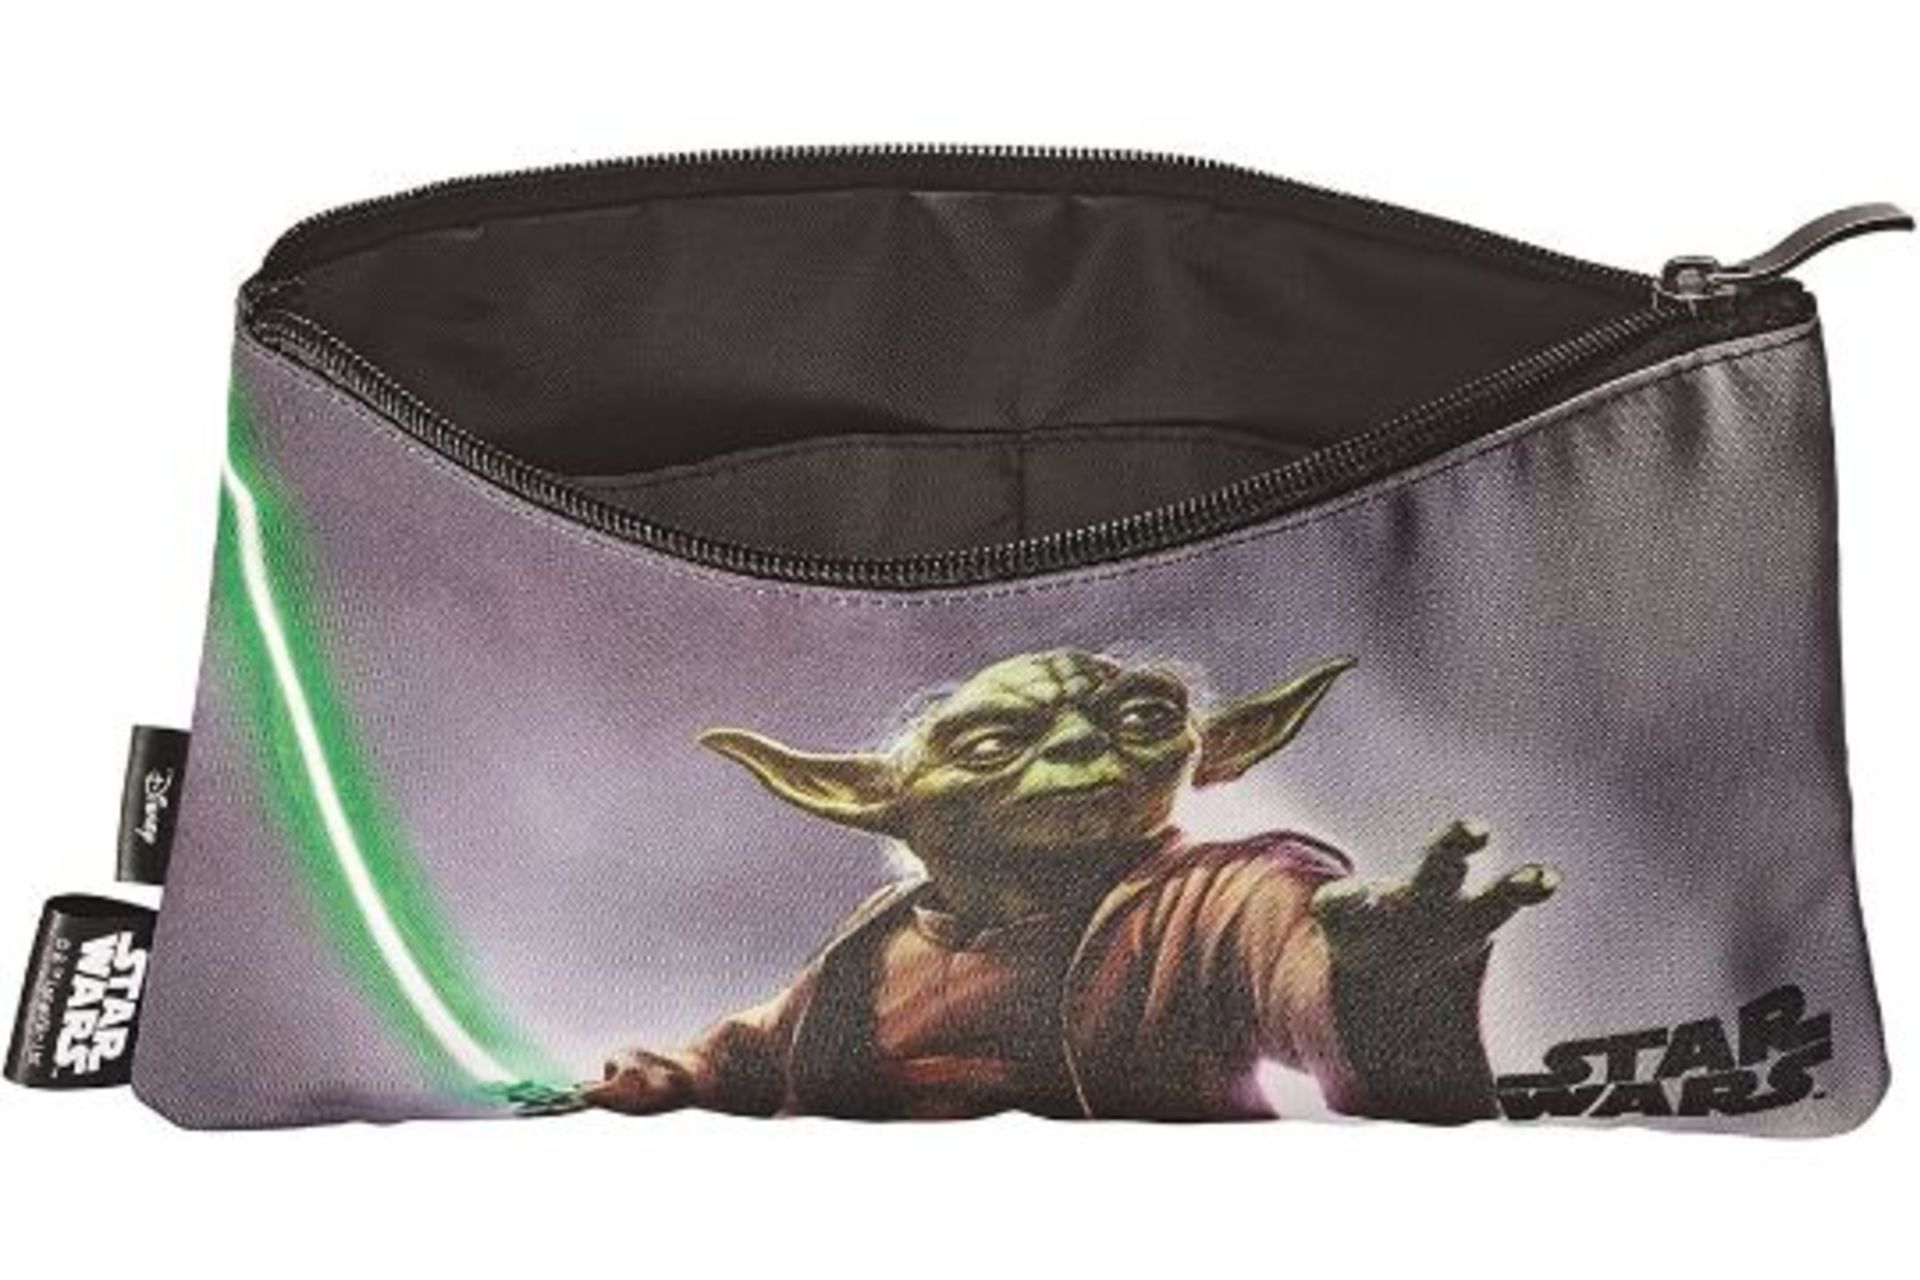 BRAND NEW STAR WARS™ YODA CARRY-ALL POUCH PENCIL CASE - Image 2 of 2